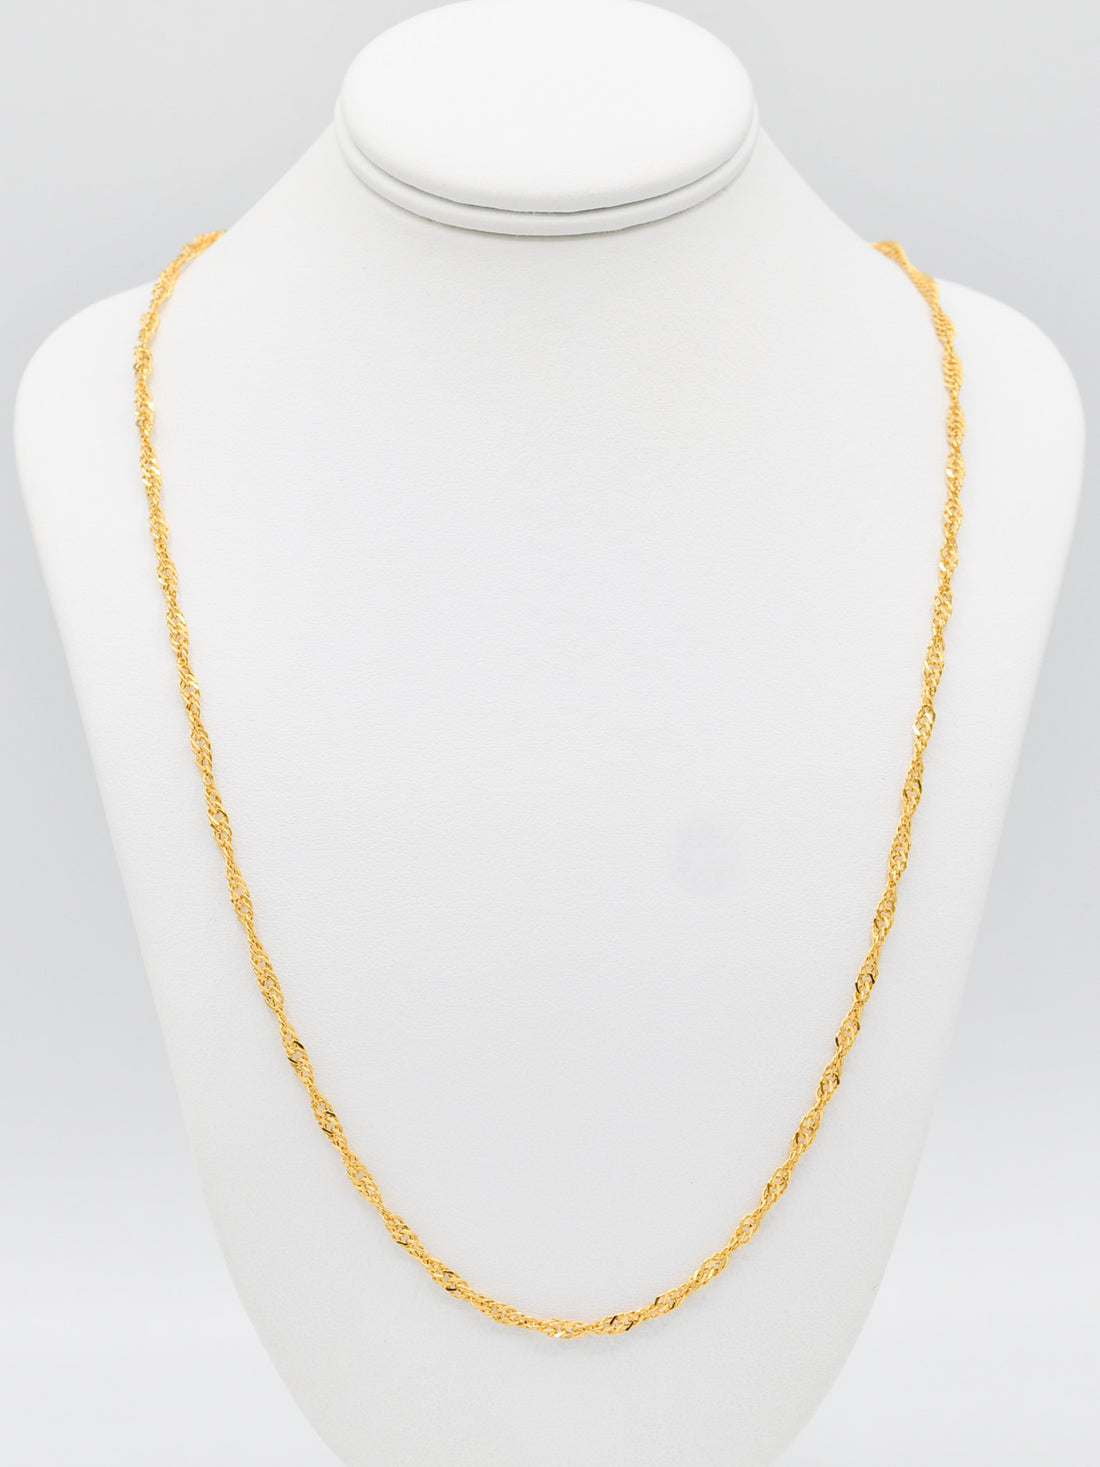 22ct Gold Hollow Twisted Chain